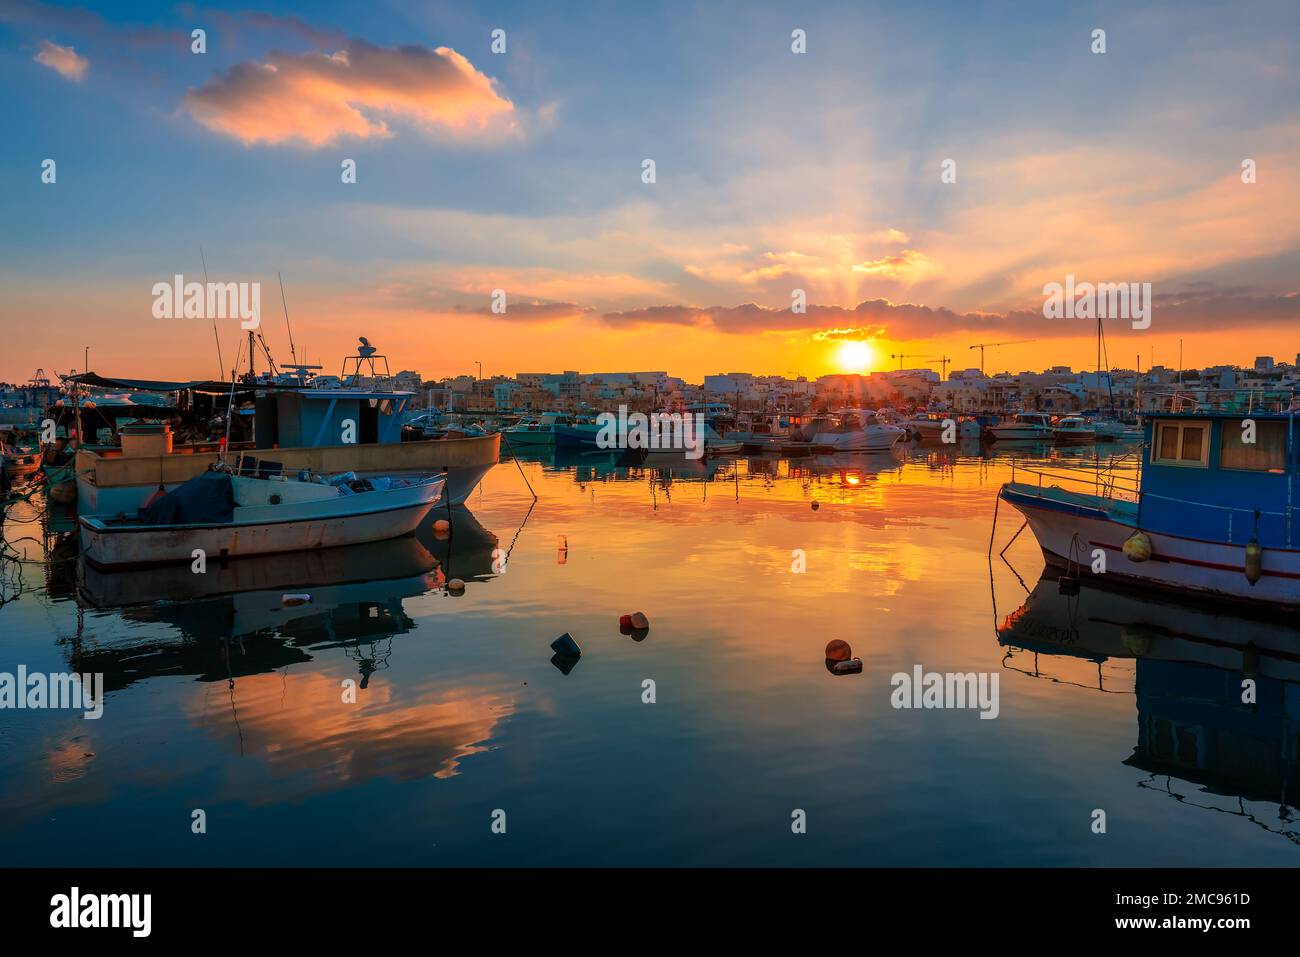 Beautiful colorful scene of a Village architecture and boats reflected in the sea, illuminated at sunset in Malta Stock Photo